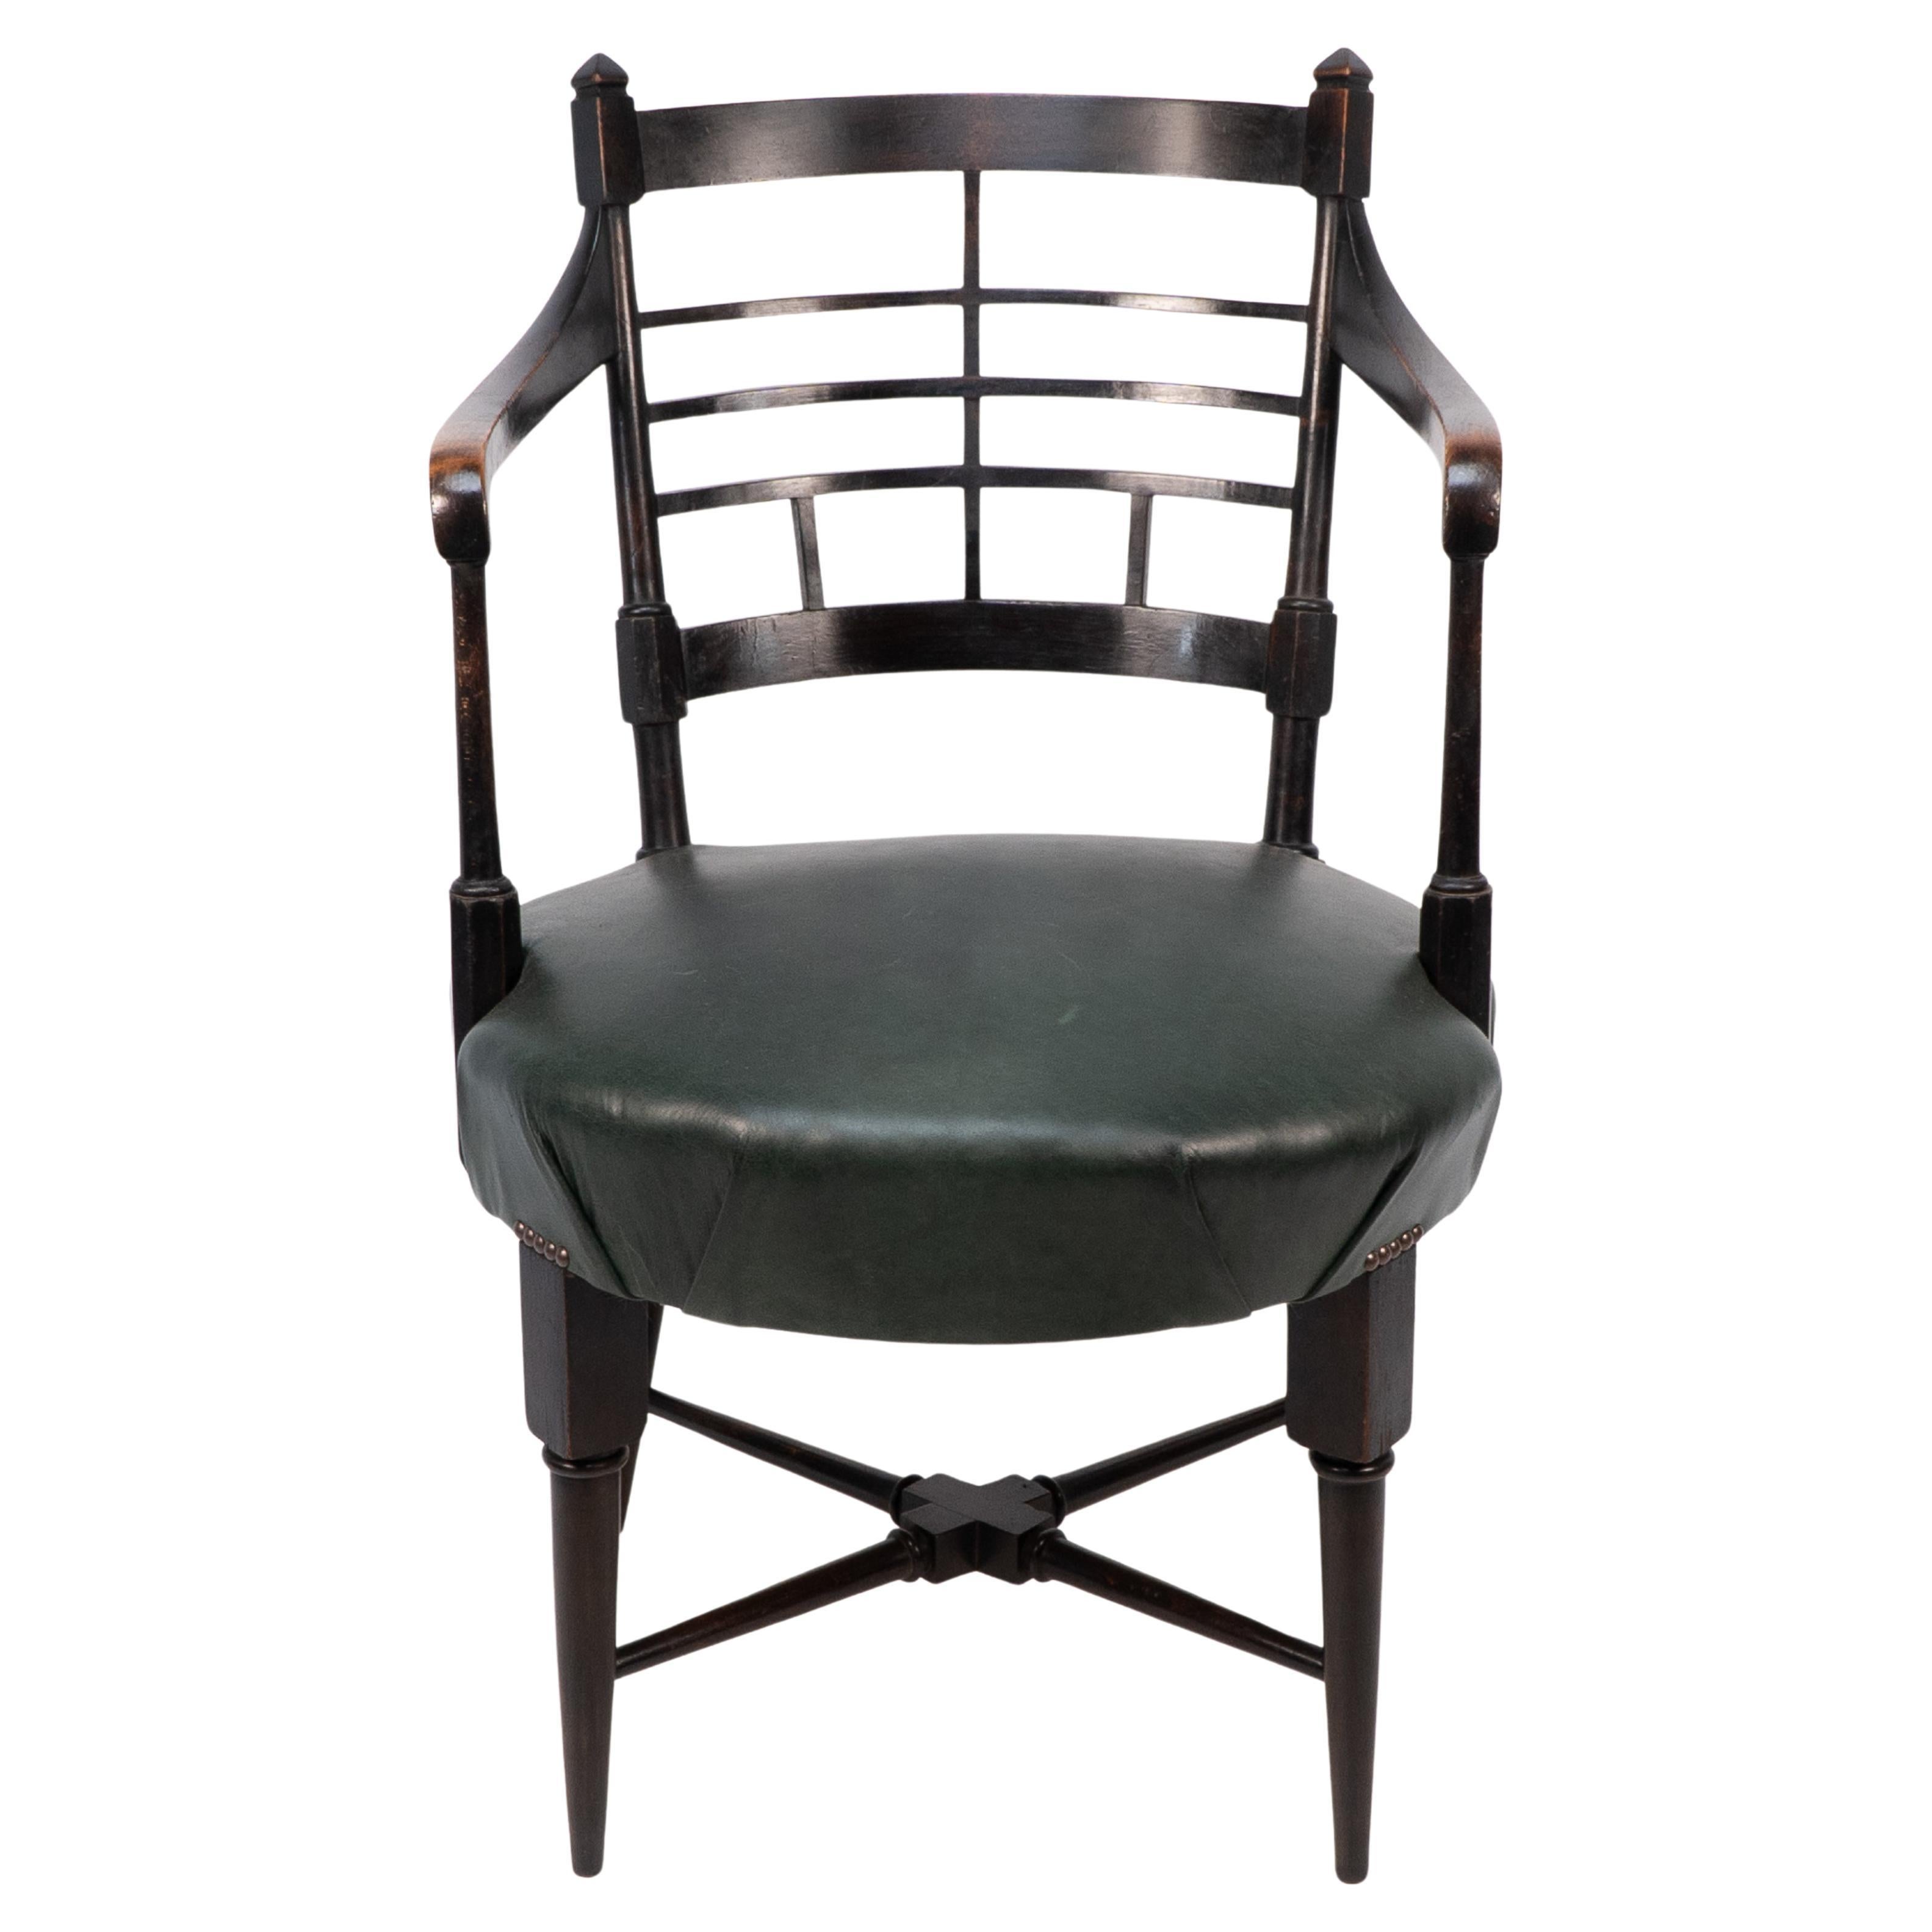 E W Godwin for William Watt. An Anglo-Japanese Old English or Jacobean ebonized armchair. See Susan Webber Soros. The Secular Furniture of E W Godwin Illustration 109 for a cane-seat version.Seat Height: 47 cm Arm Height: 72 cm
